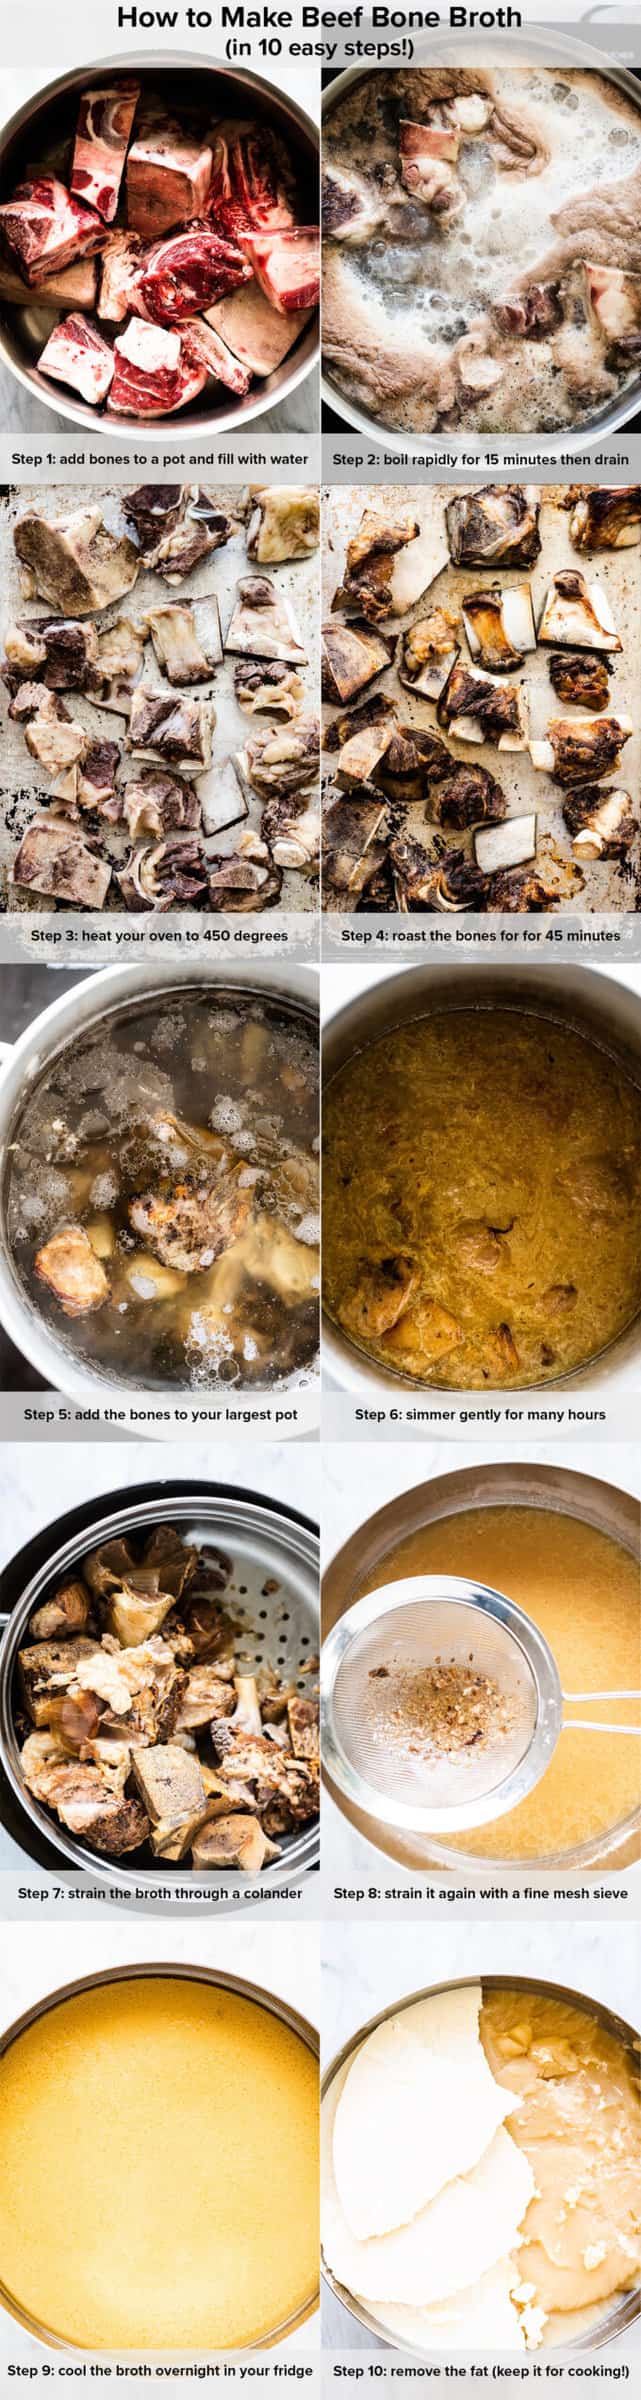 Multiple images showing how to make beef bone broth in 10 steps.